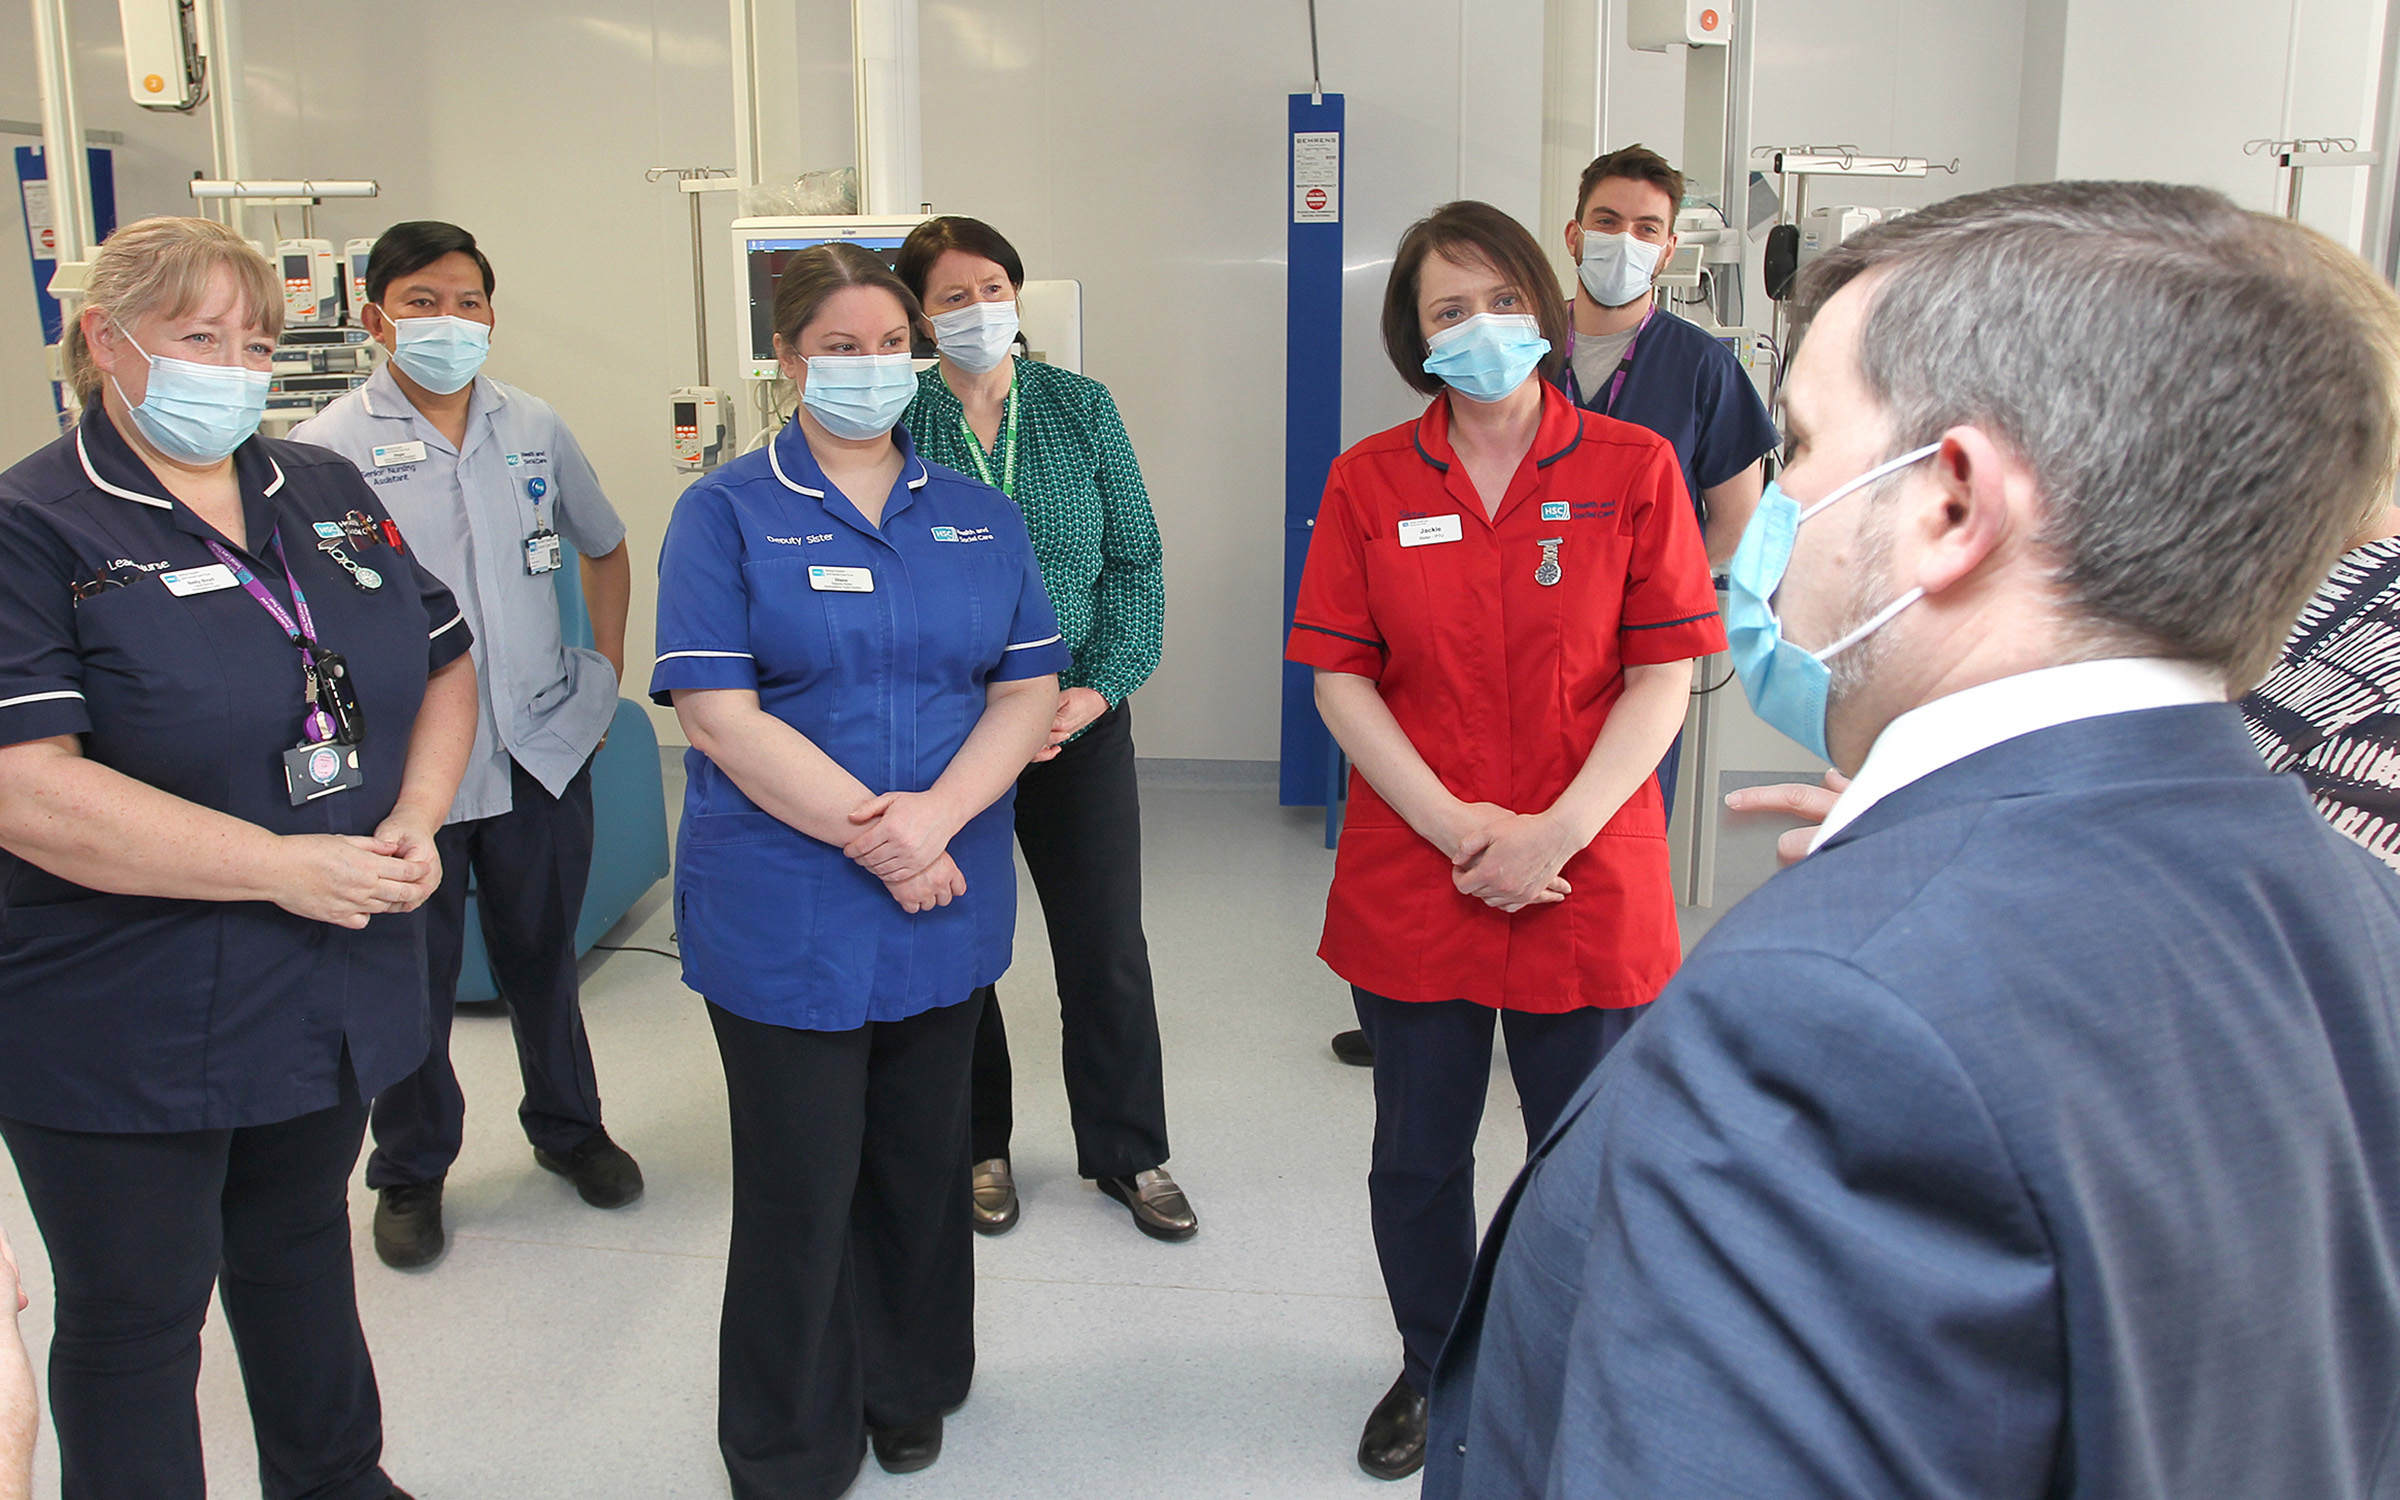 Health Minister visit to Mater Hospital